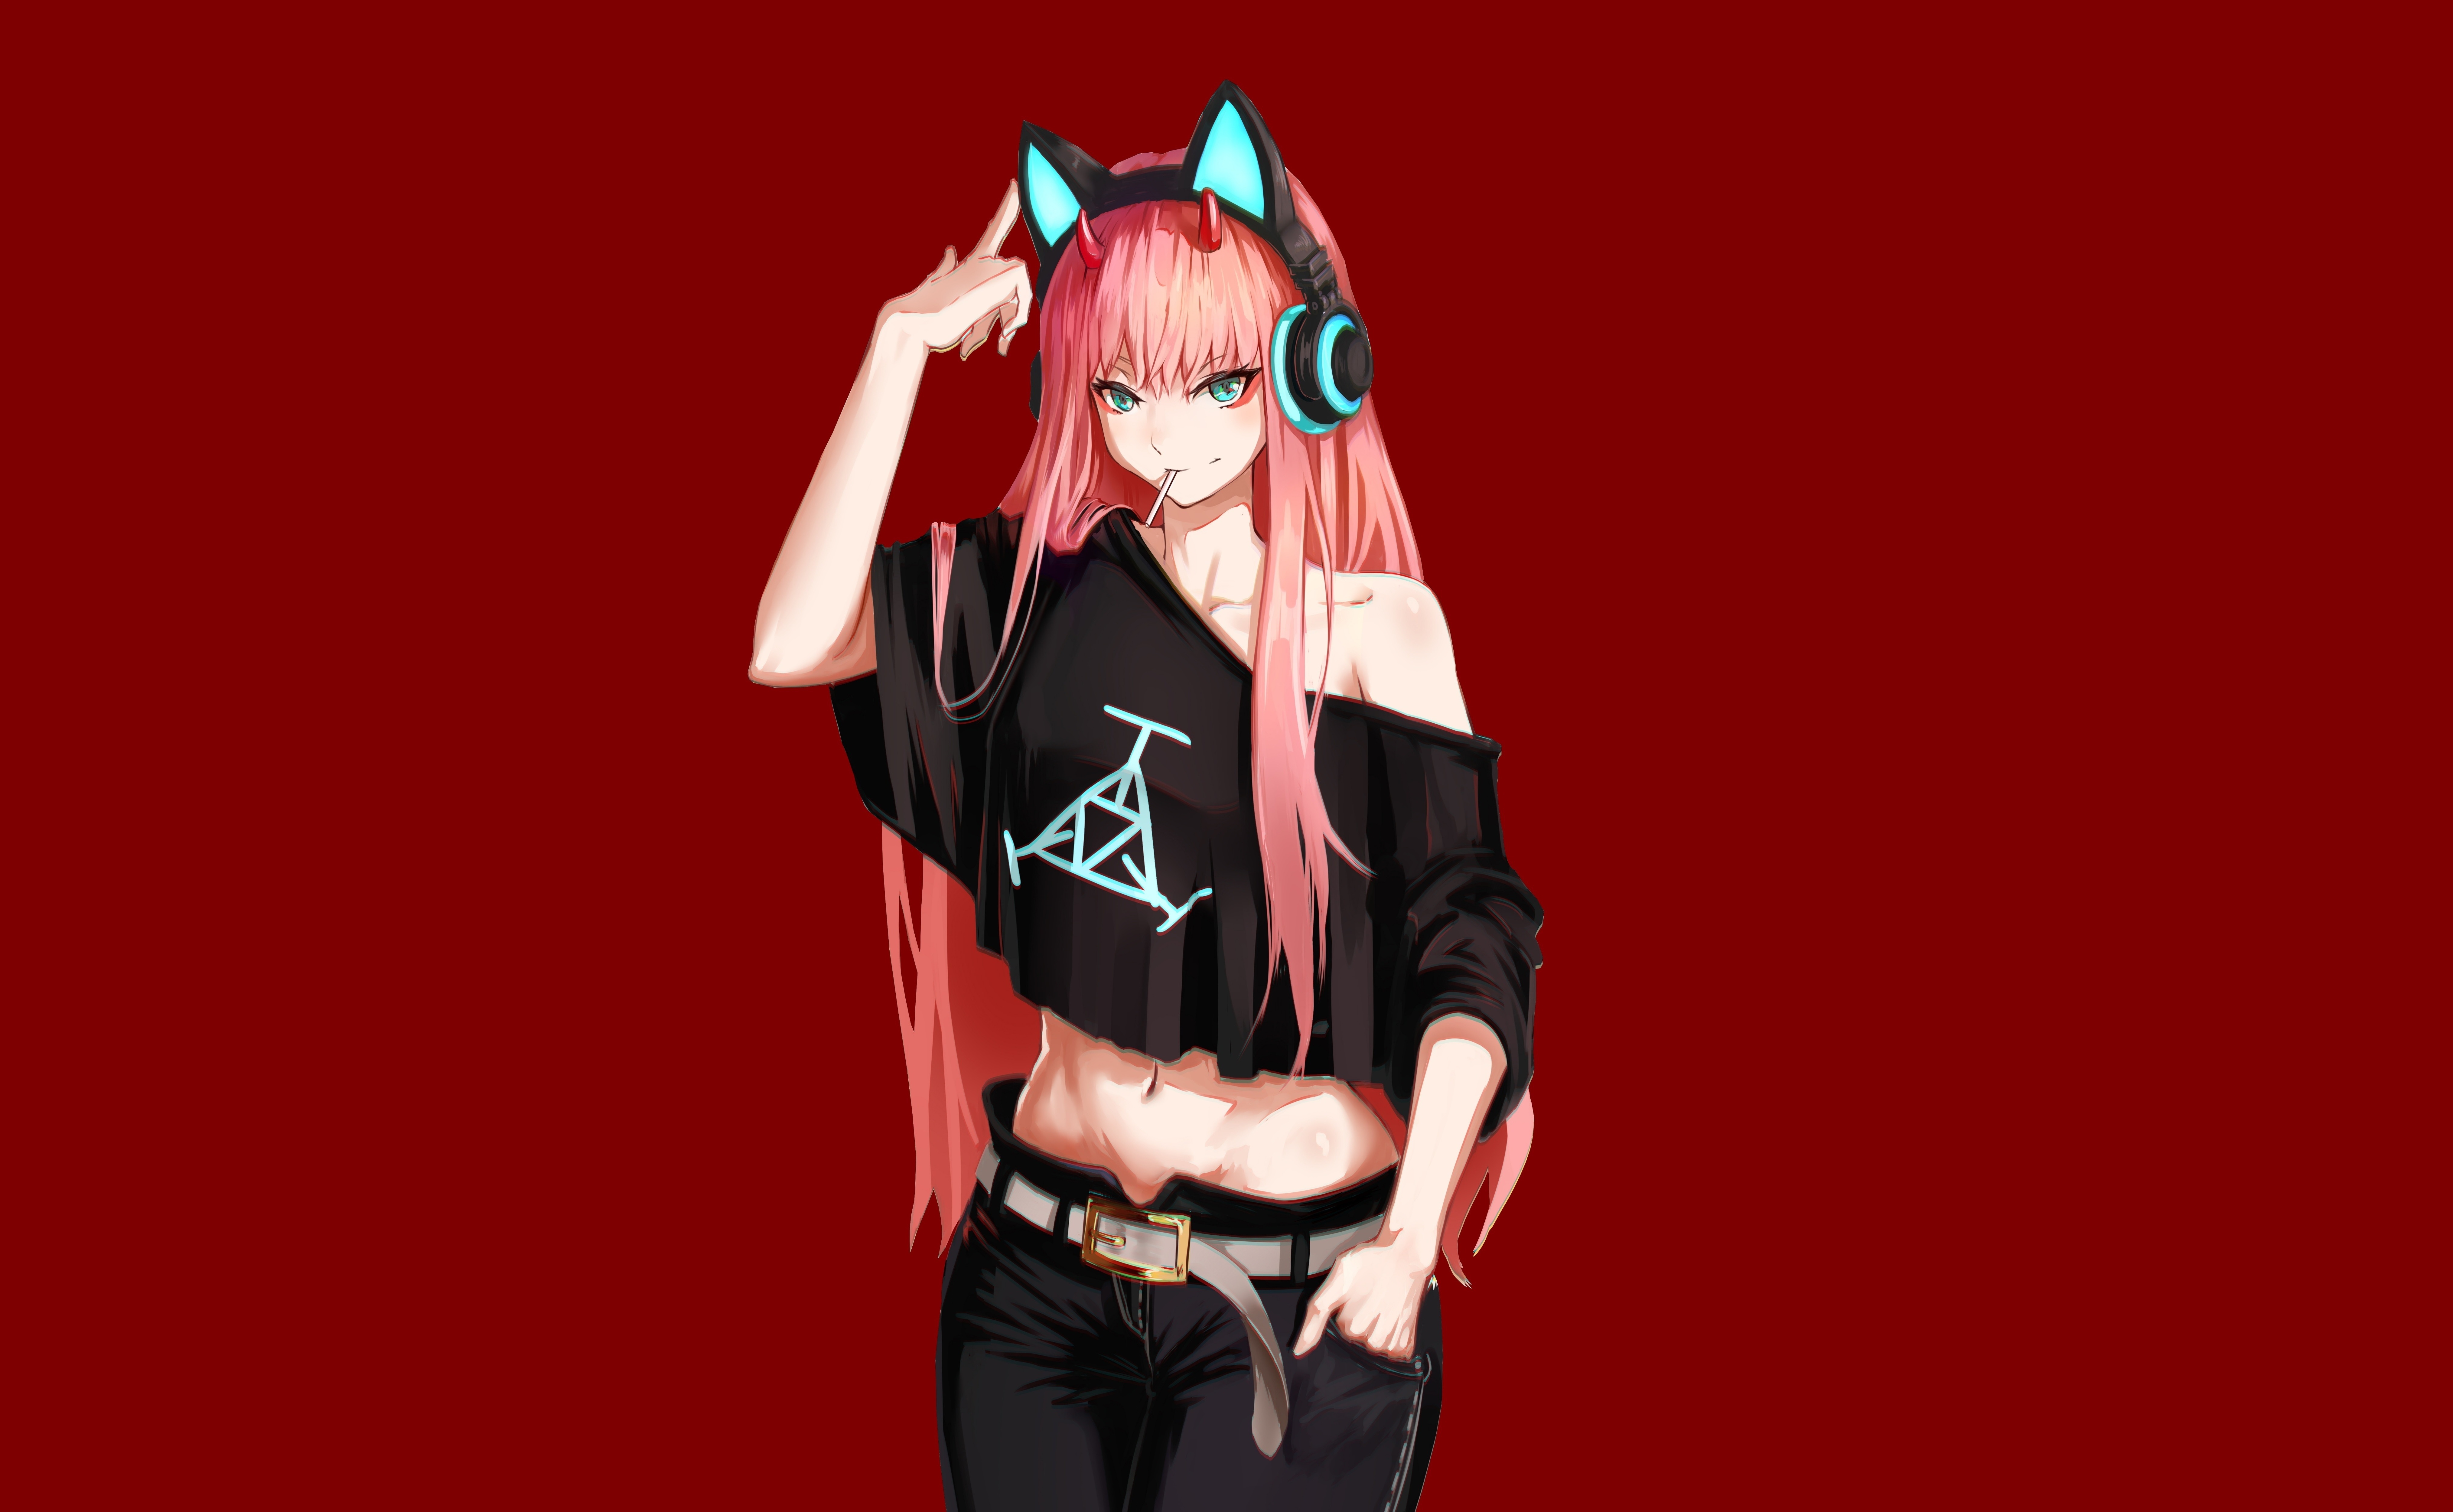 Image: Girl, Zero Two, anime, Darling in the Franxx, headphones, ears, horns, hair, look, red background